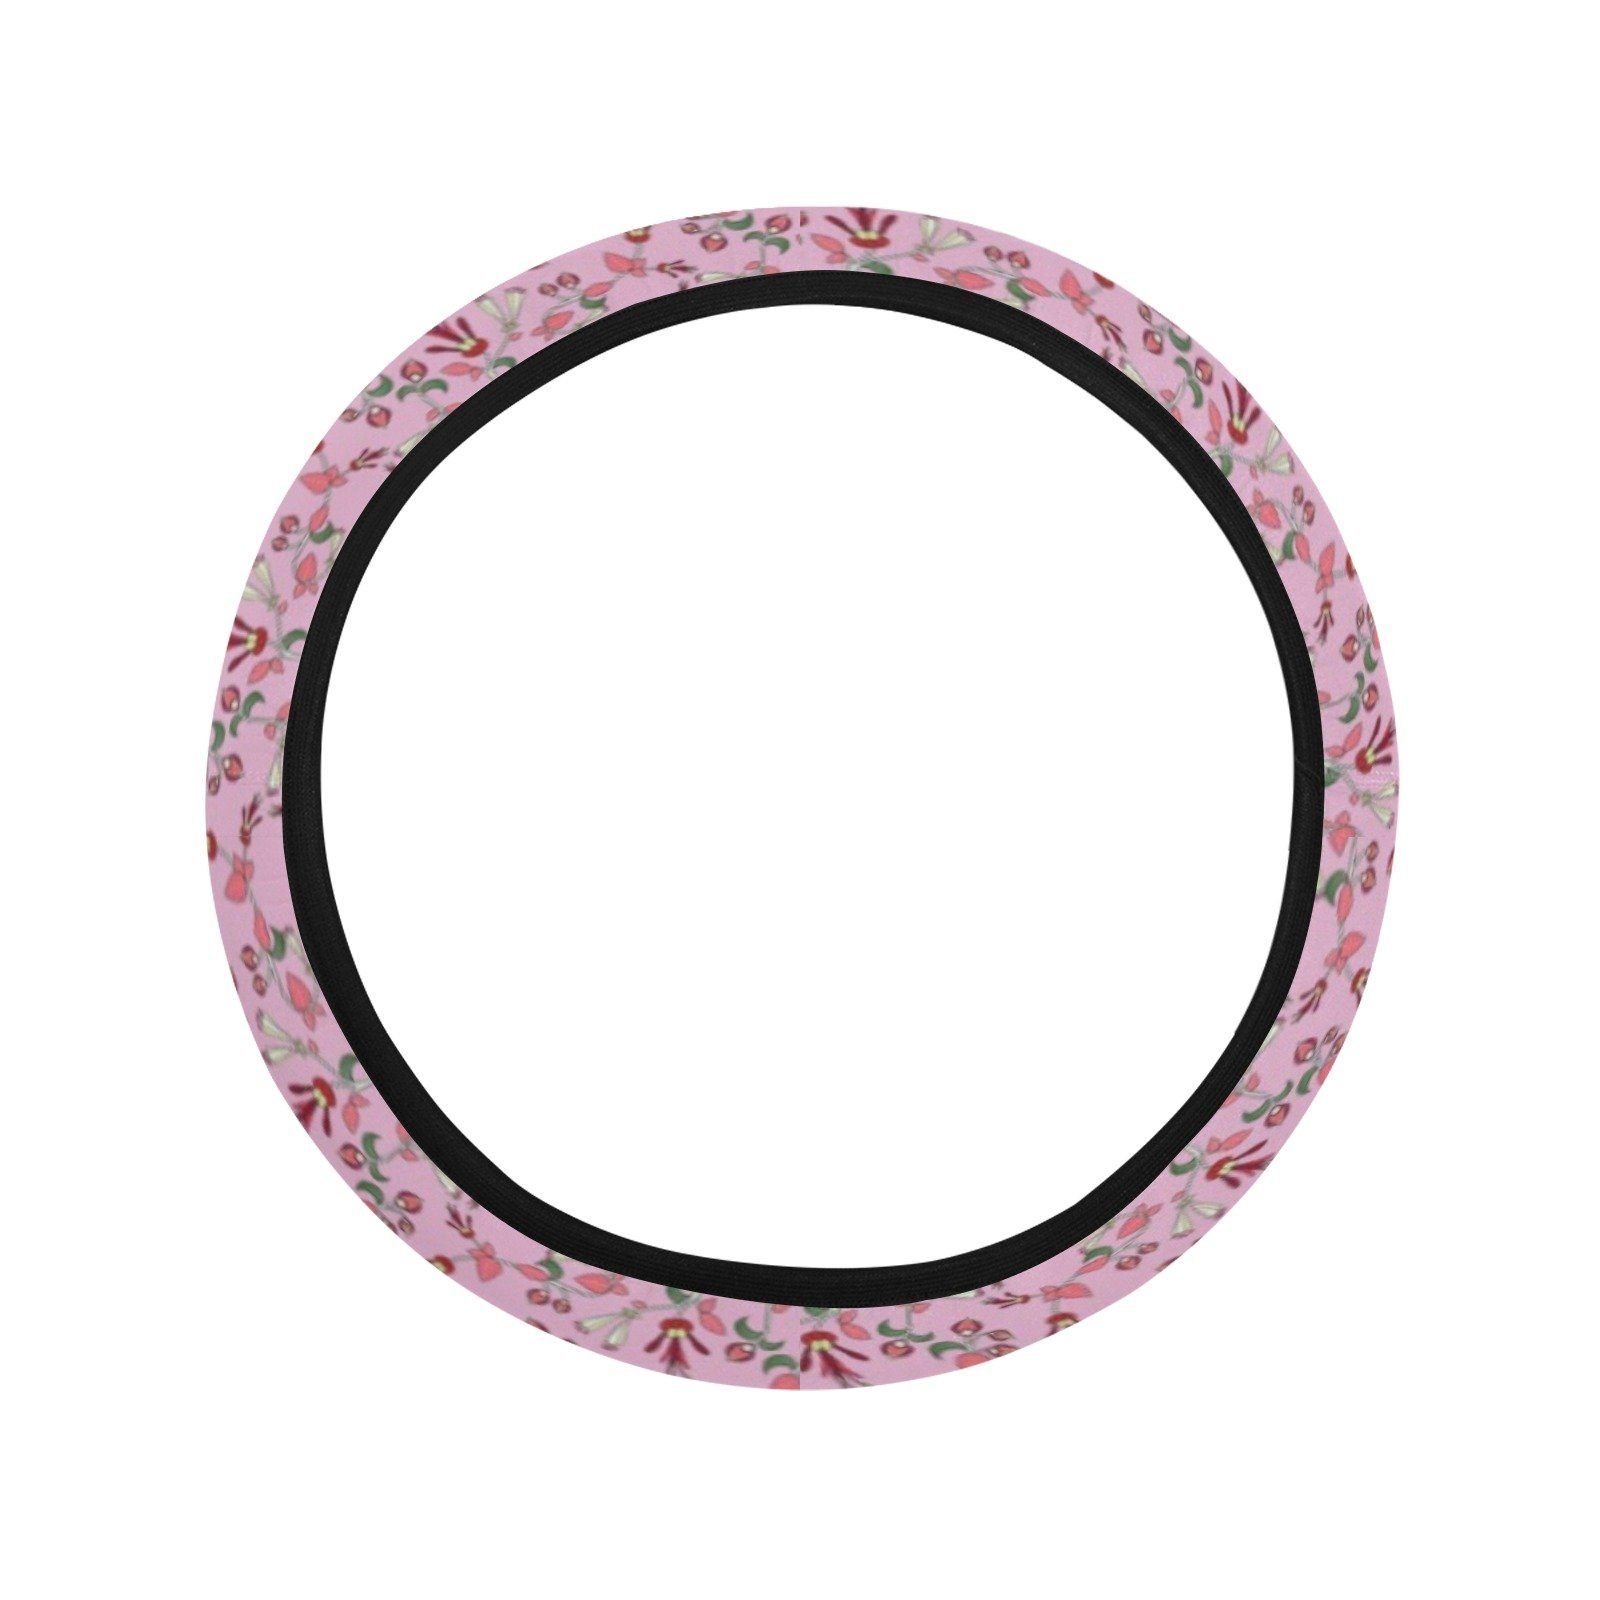 Strawberry Floral Steering Wheel Cover with Elastic Edge Steering Wheel Cover with Elastic Edge e-joyer 